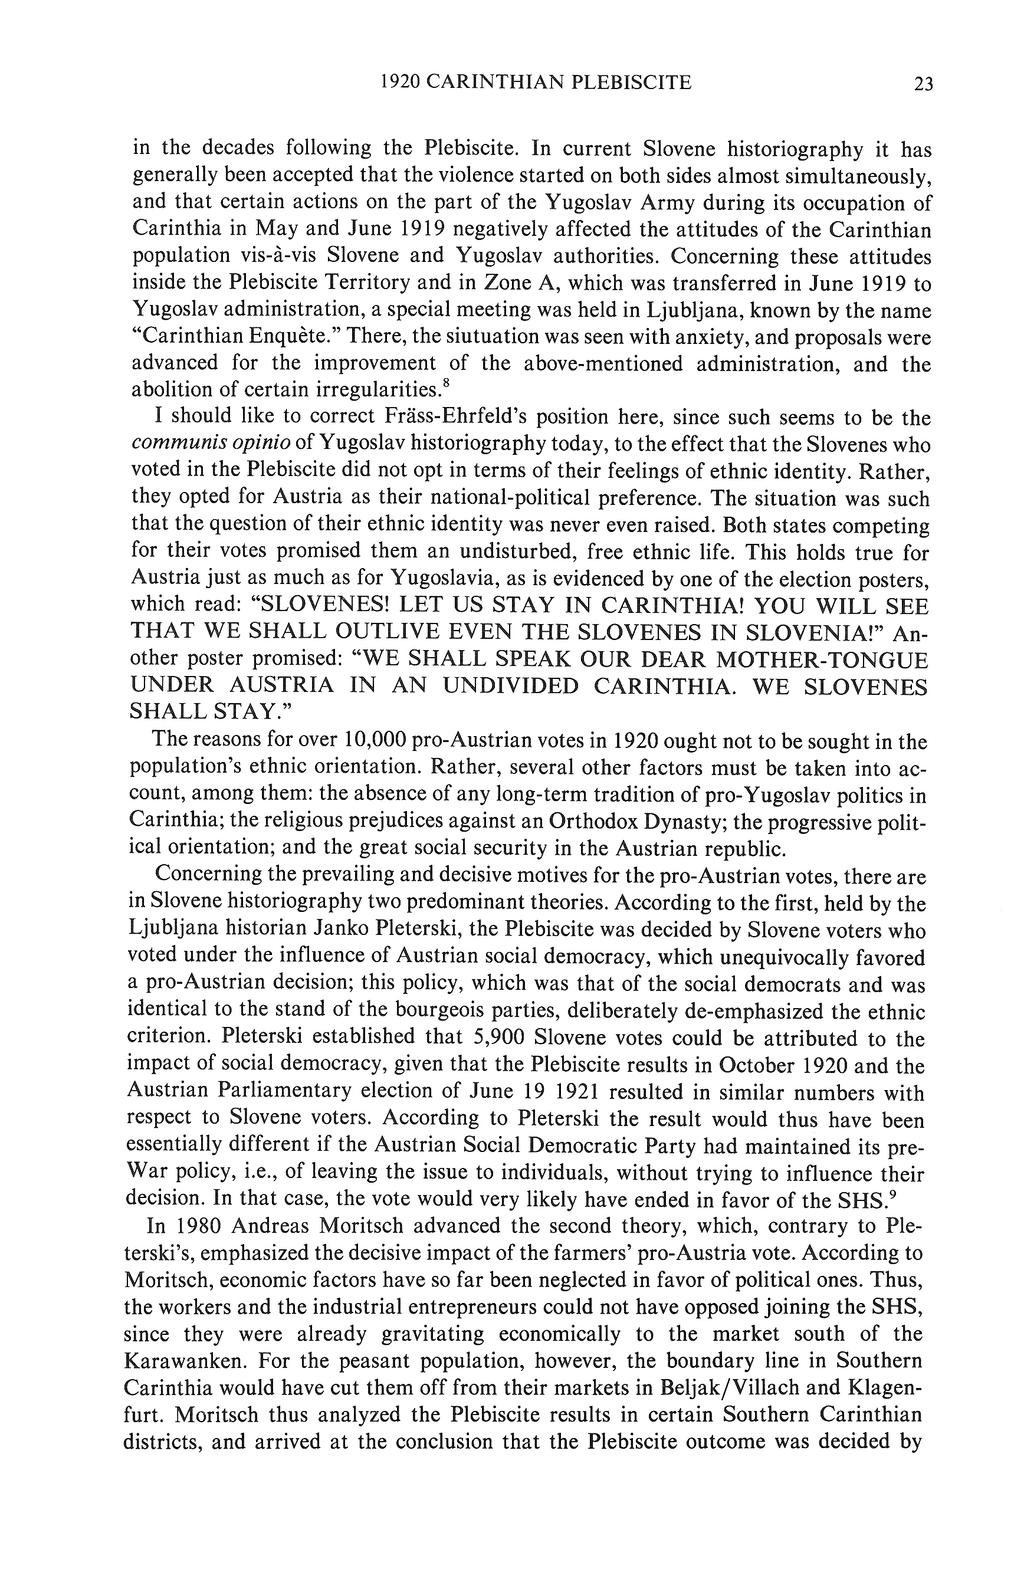 1920 CARINTHIAN PLEBISCITE 23 in the decades following the Plebiscite In current Slovene historiography it has generally been accepted that the violence started on both sides almost simultaneously,